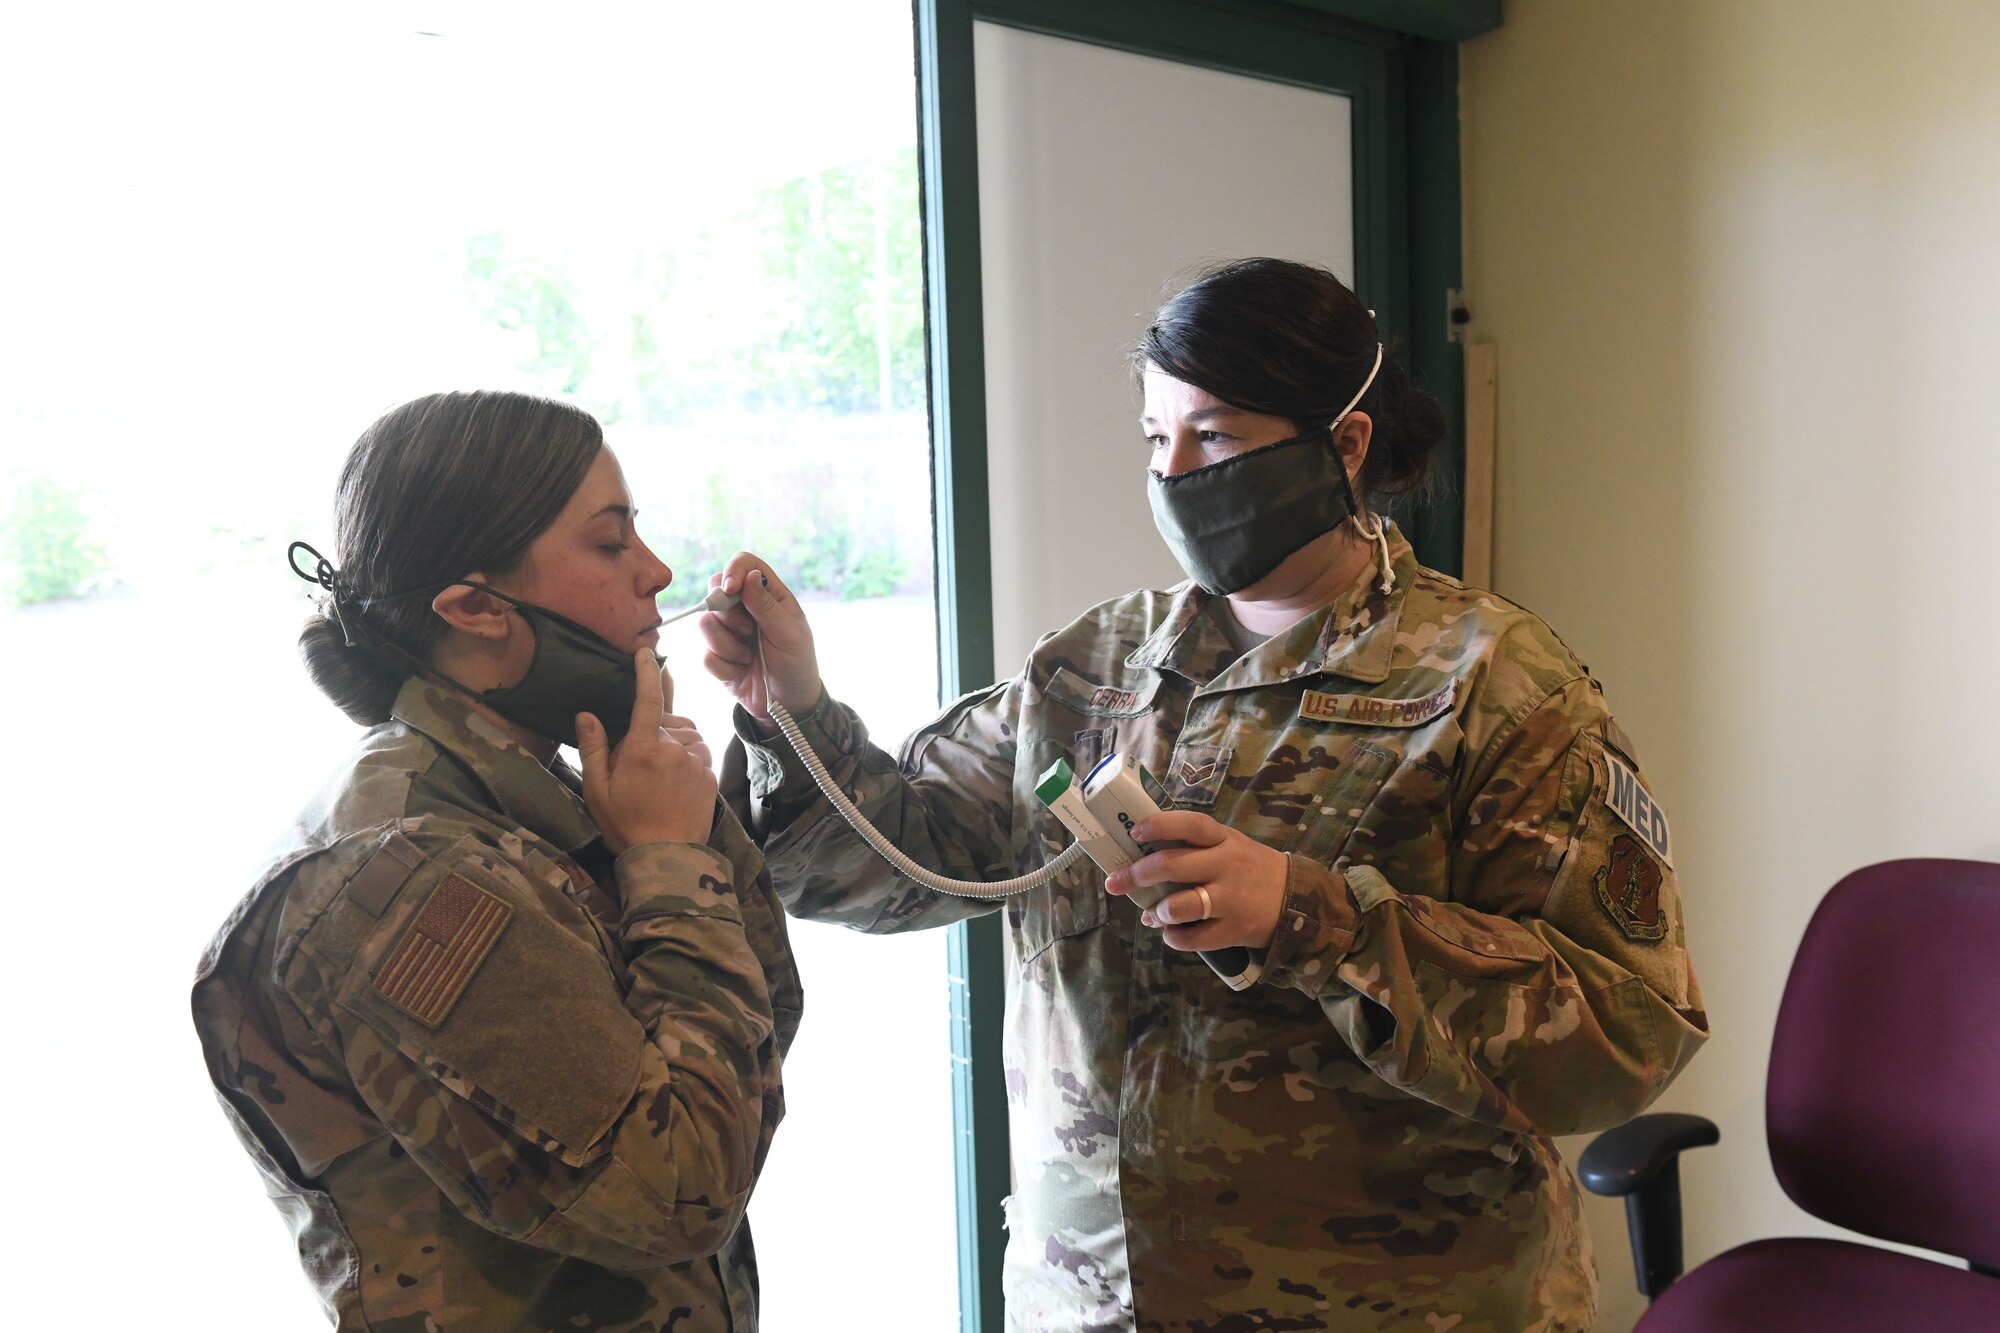 U.S. Air Force Senior Airman Marissa Cerra (right) practices checking an incoming patient for fever and abnormal health while conducting drills prior to accepting live patients, at the North Carolina National Guard Medical Support Shelter (MSS), Central North Carolina, April 29, 2020. TThe MSS is intended to act as an overflow shelter for hospital patients not infected with the COVID-19 virus and is maned by a joint task force of Army and Airforce National Guard medical staff.